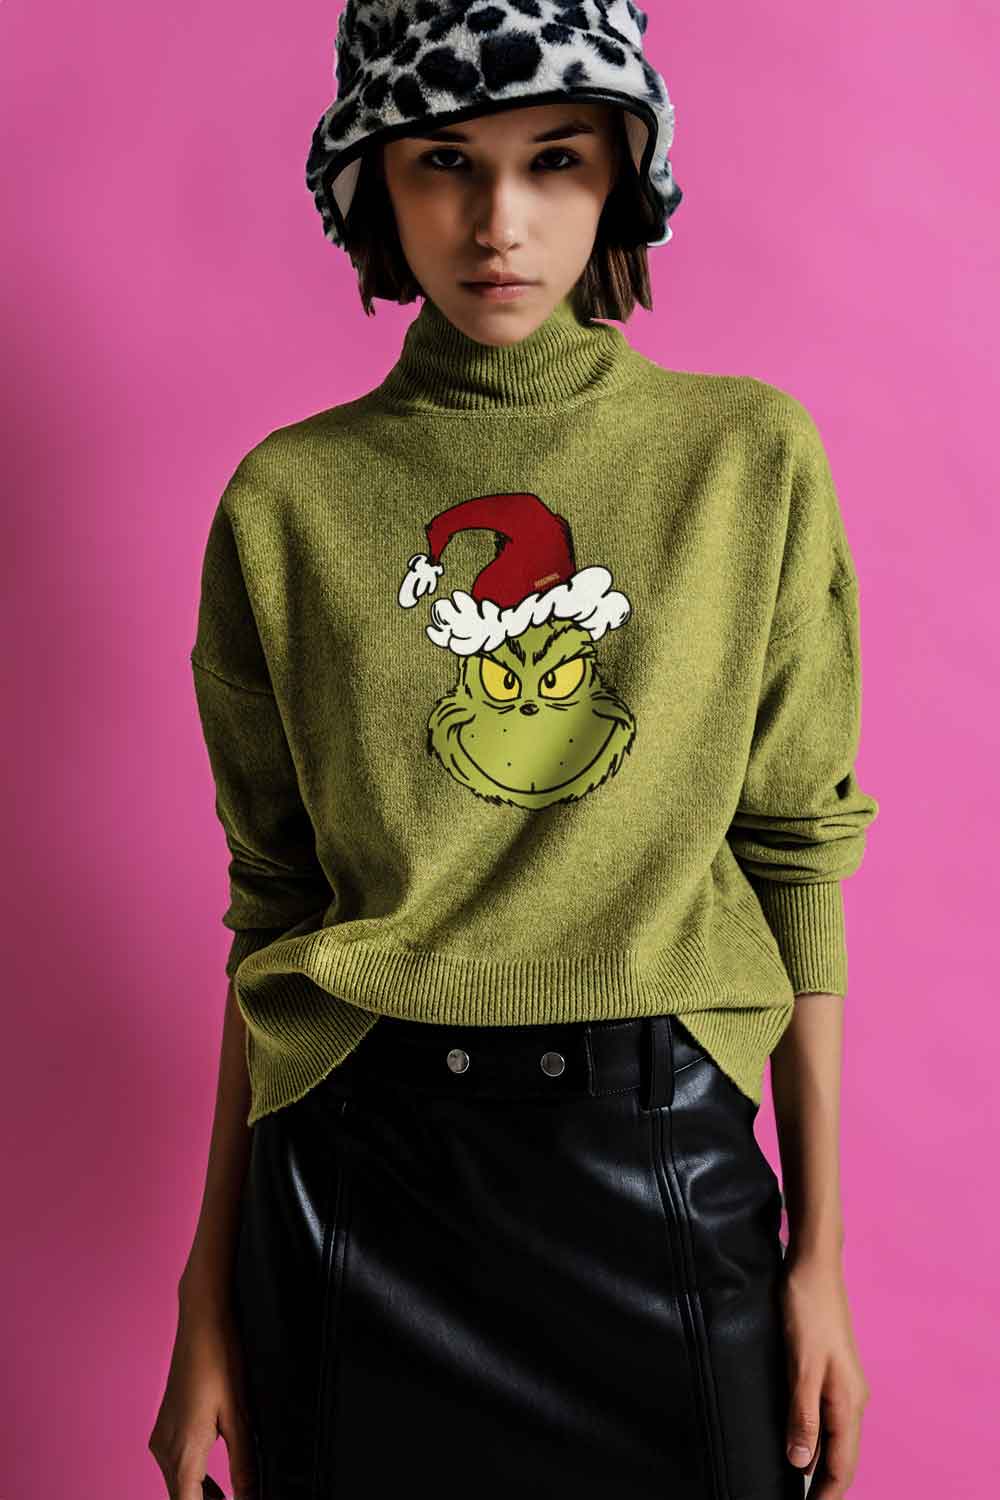 FEELINGS (Inspired by THE GRINCH) - Retro Christmas High Neck Jumper in Green